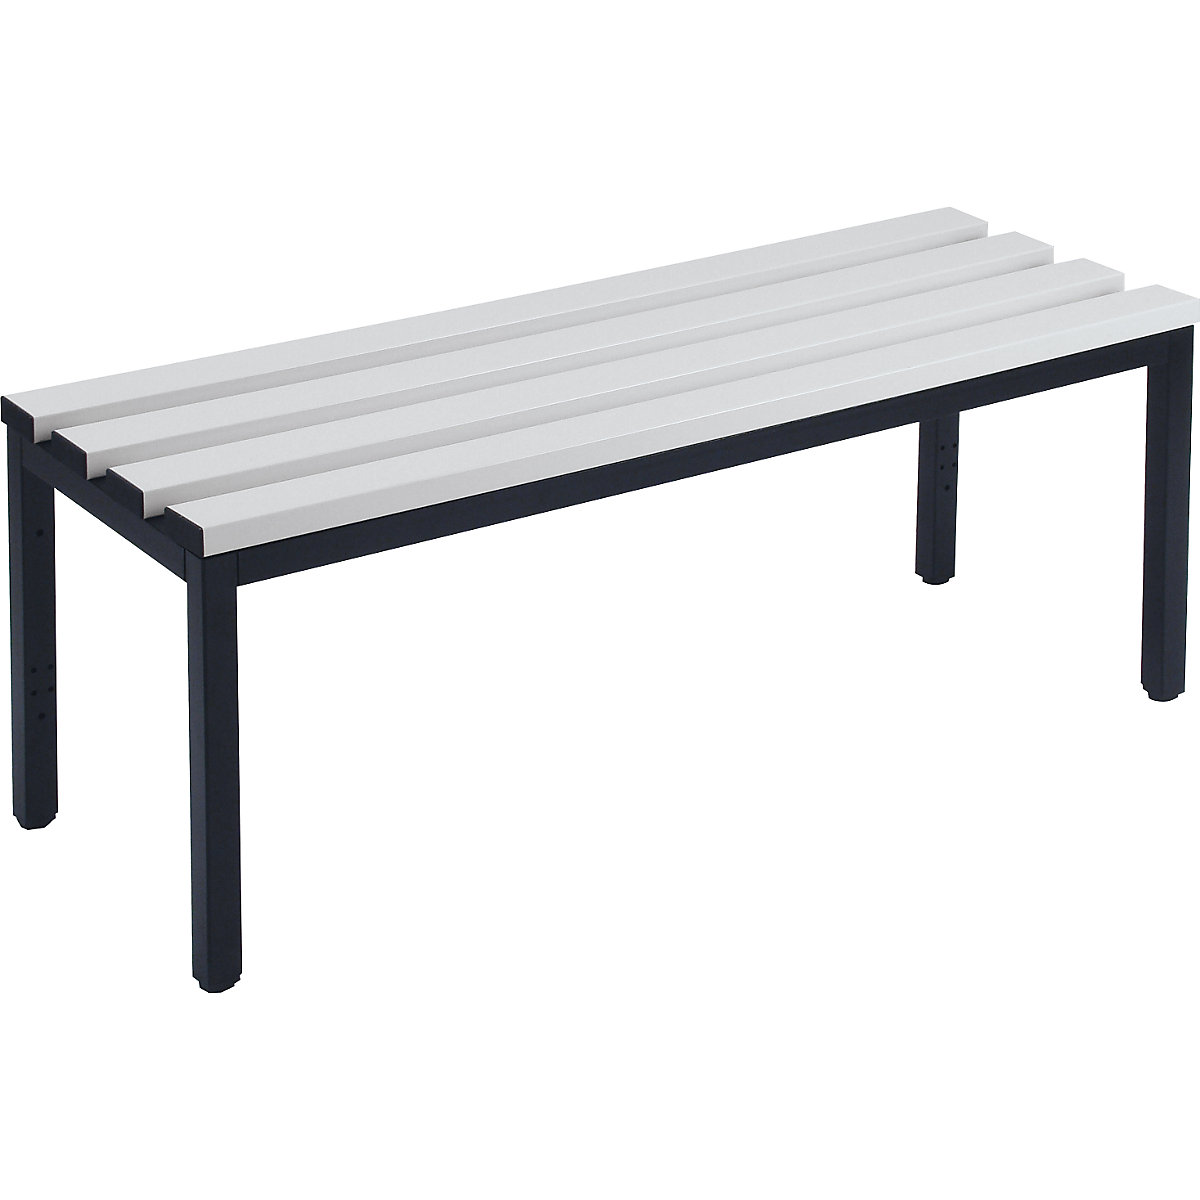 Cloakroom bench without back rest - Wolf